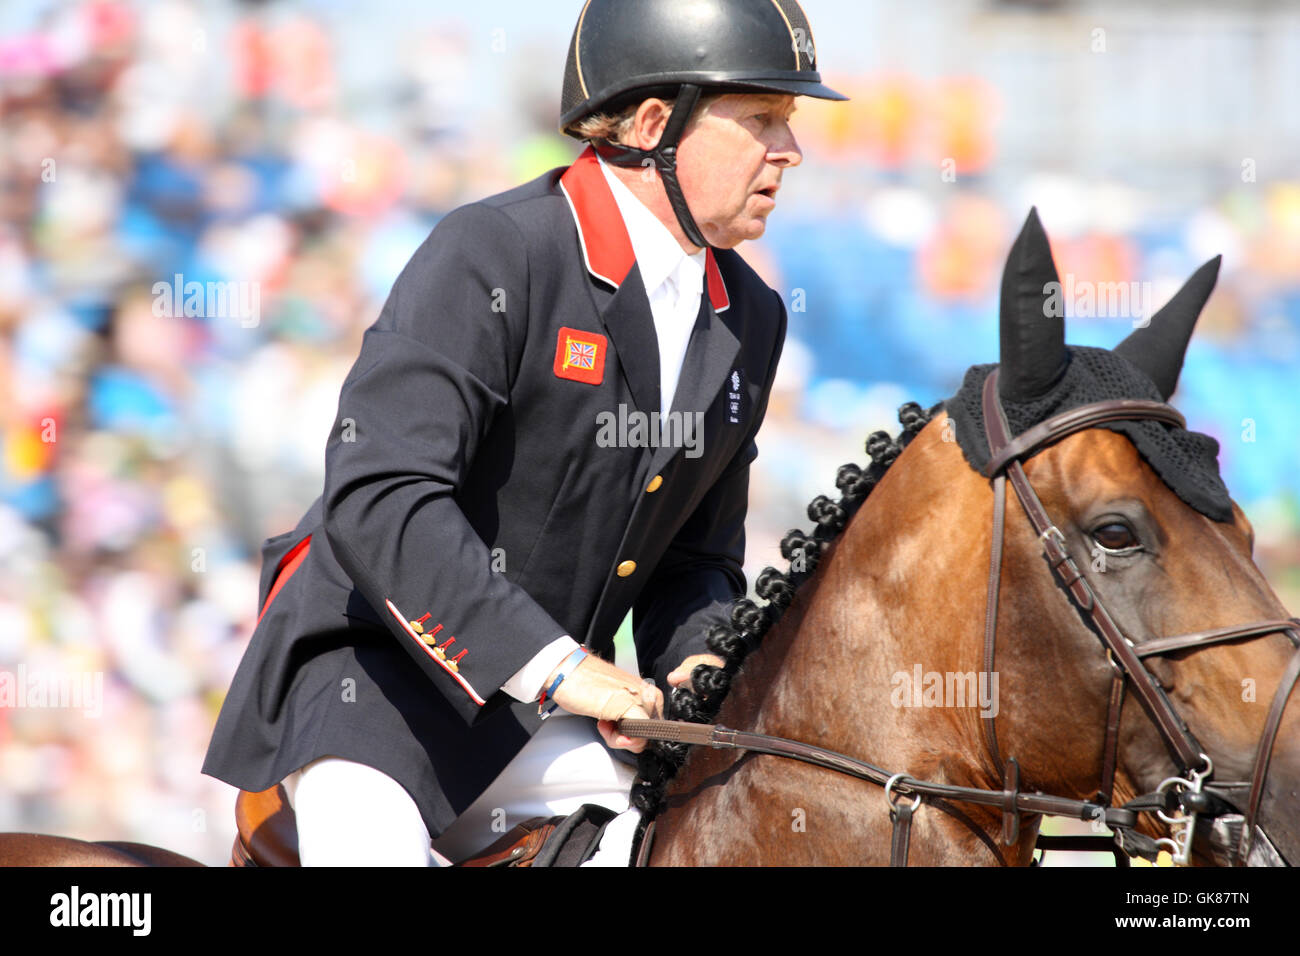 Rio de Janeiro, Brazil. 19th August, 2016. Concentration on the face of Nick Skelton from GBR on 'Big Star' in Round B of the Olympic Equestrian Show Jumping Final in Rio de Janeiro, Brazil. Stock Photo